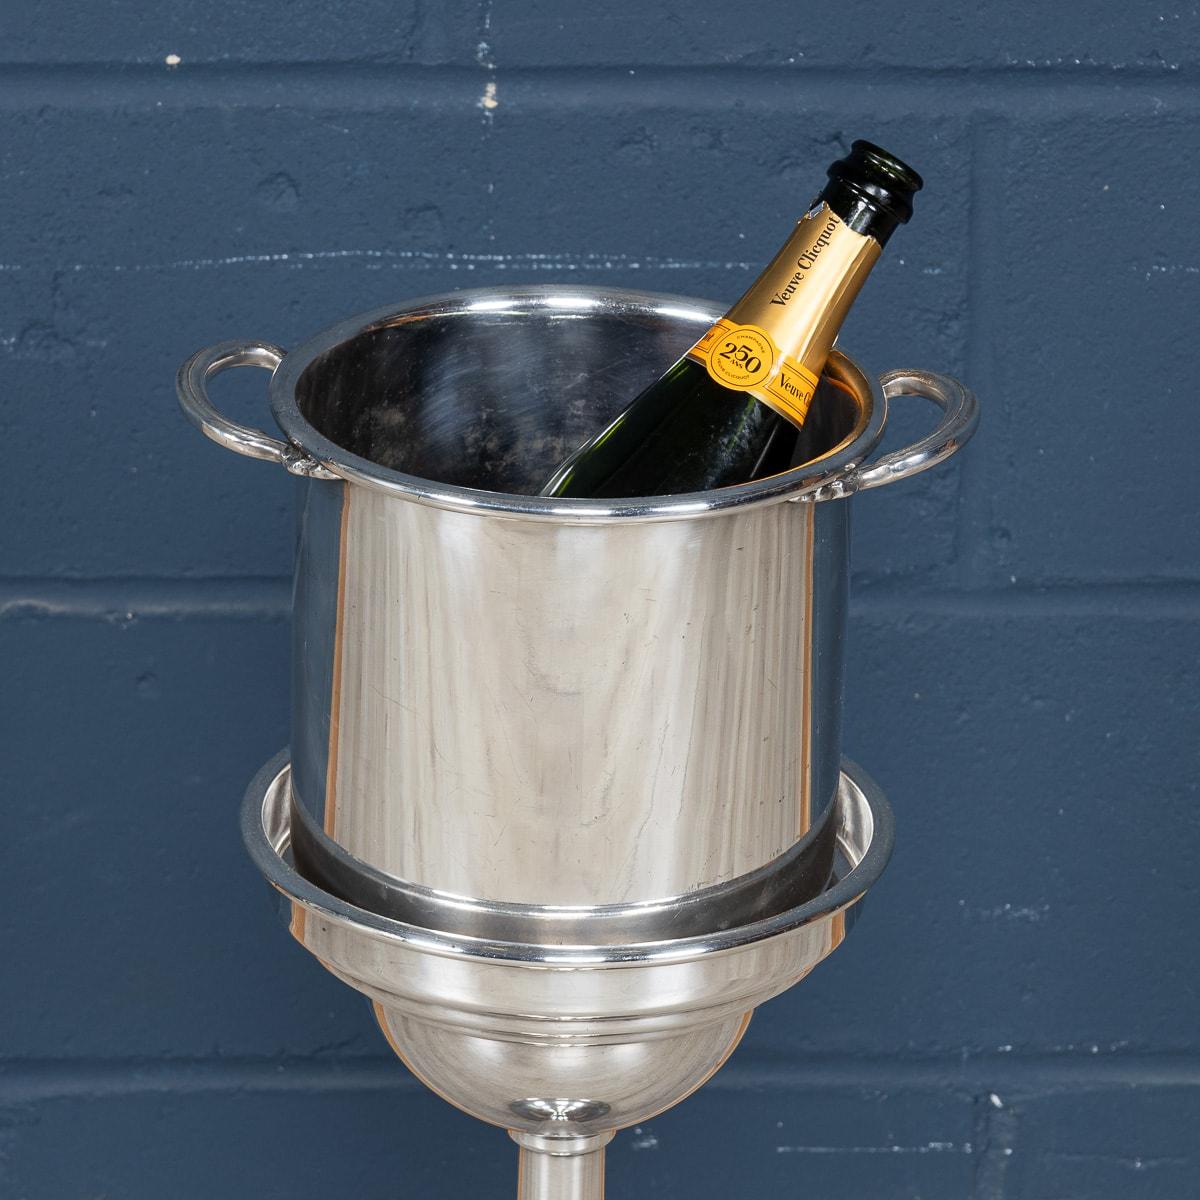 American Mid 20th Century Art Deco Champagne Bucket On Stand, Made In USA c.1960 For Sale